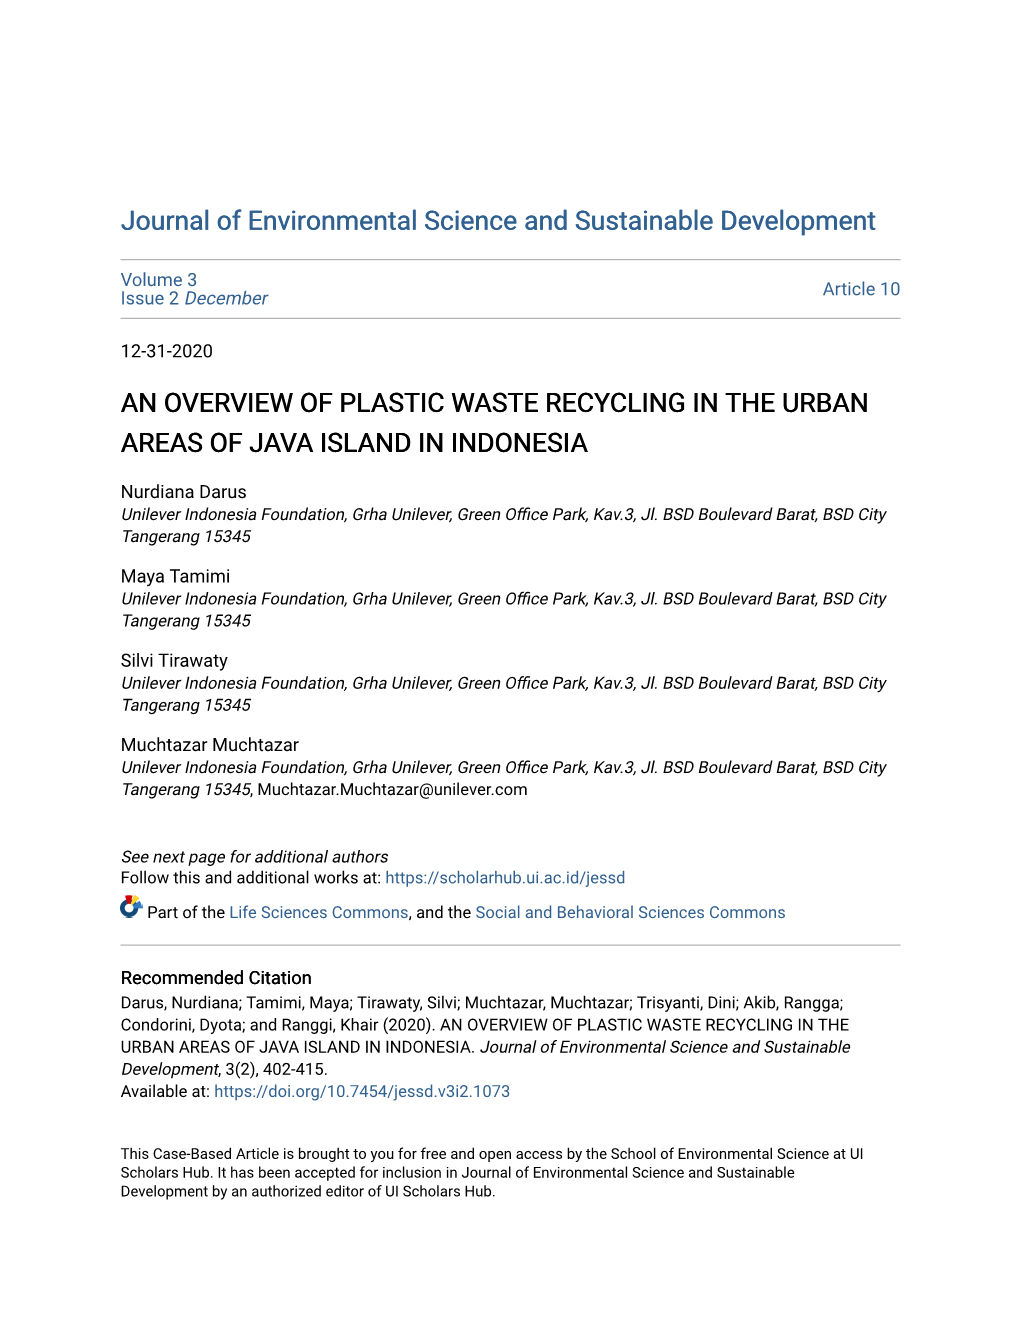 An Overview of Plastic Waste Recycling in the Urban Areas of Java Island in Indonesia